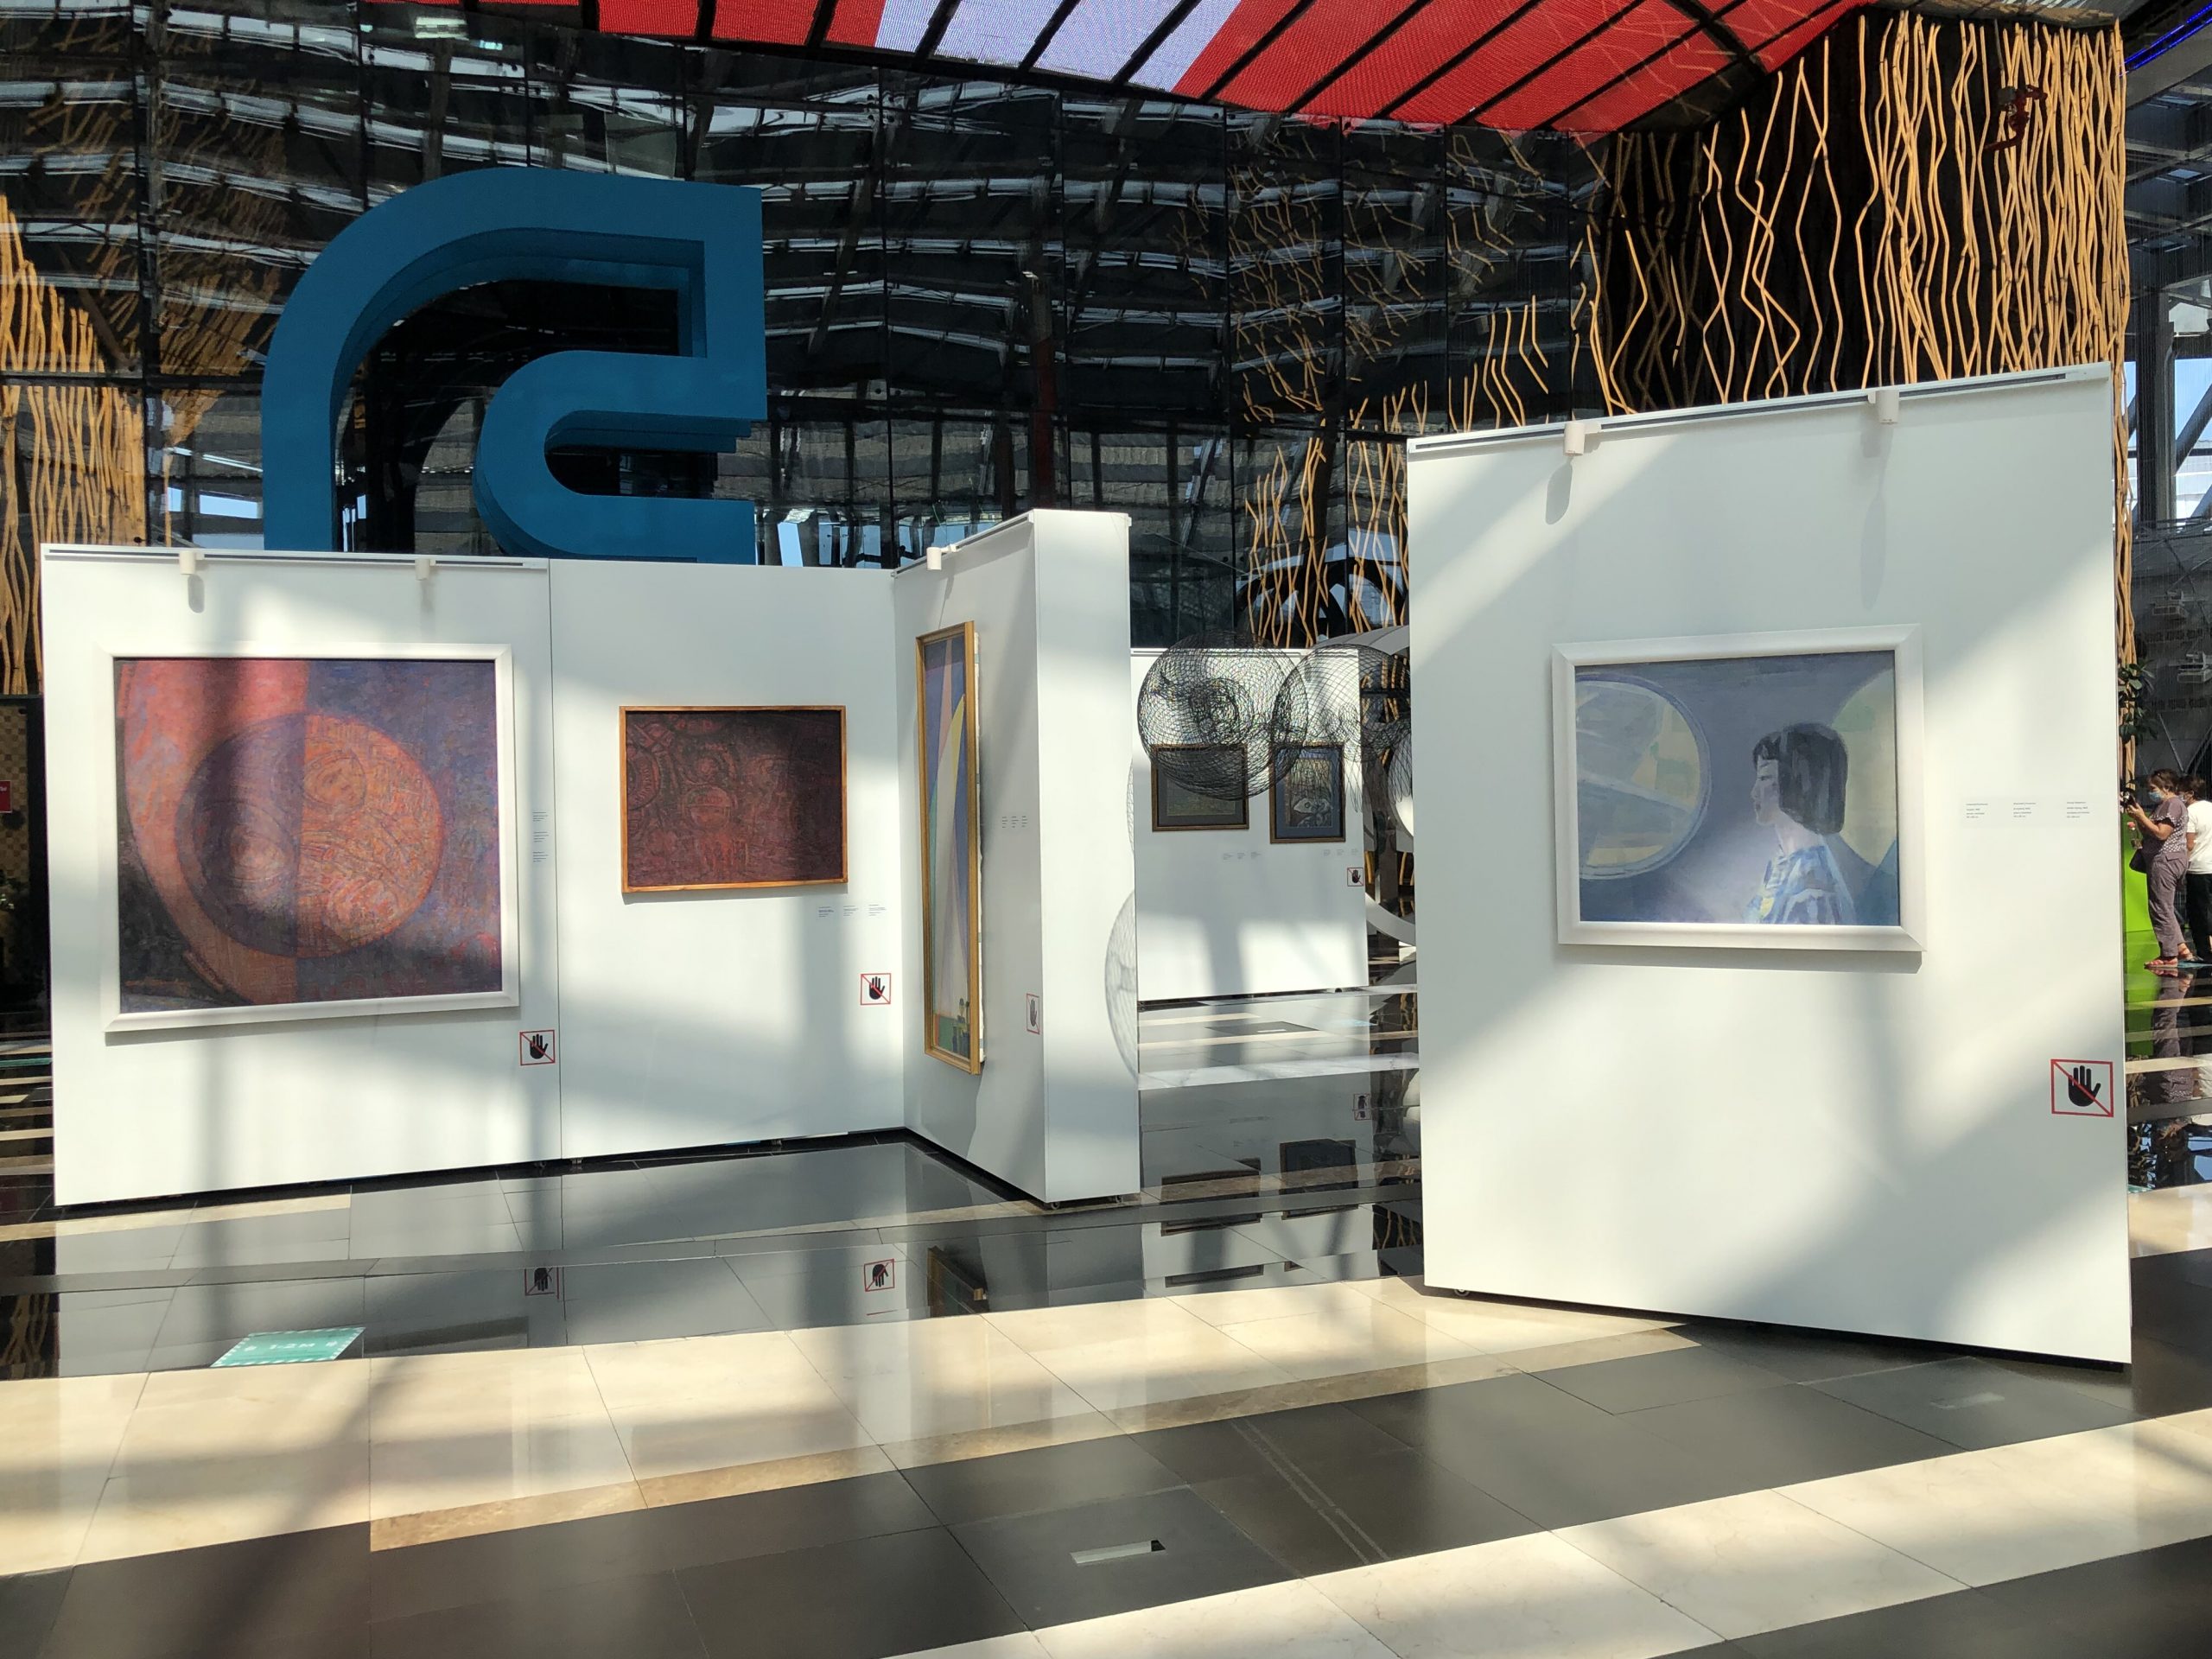 Cosmos as inspiration: a unique exhibition is launched in the city of Nur-Sultan